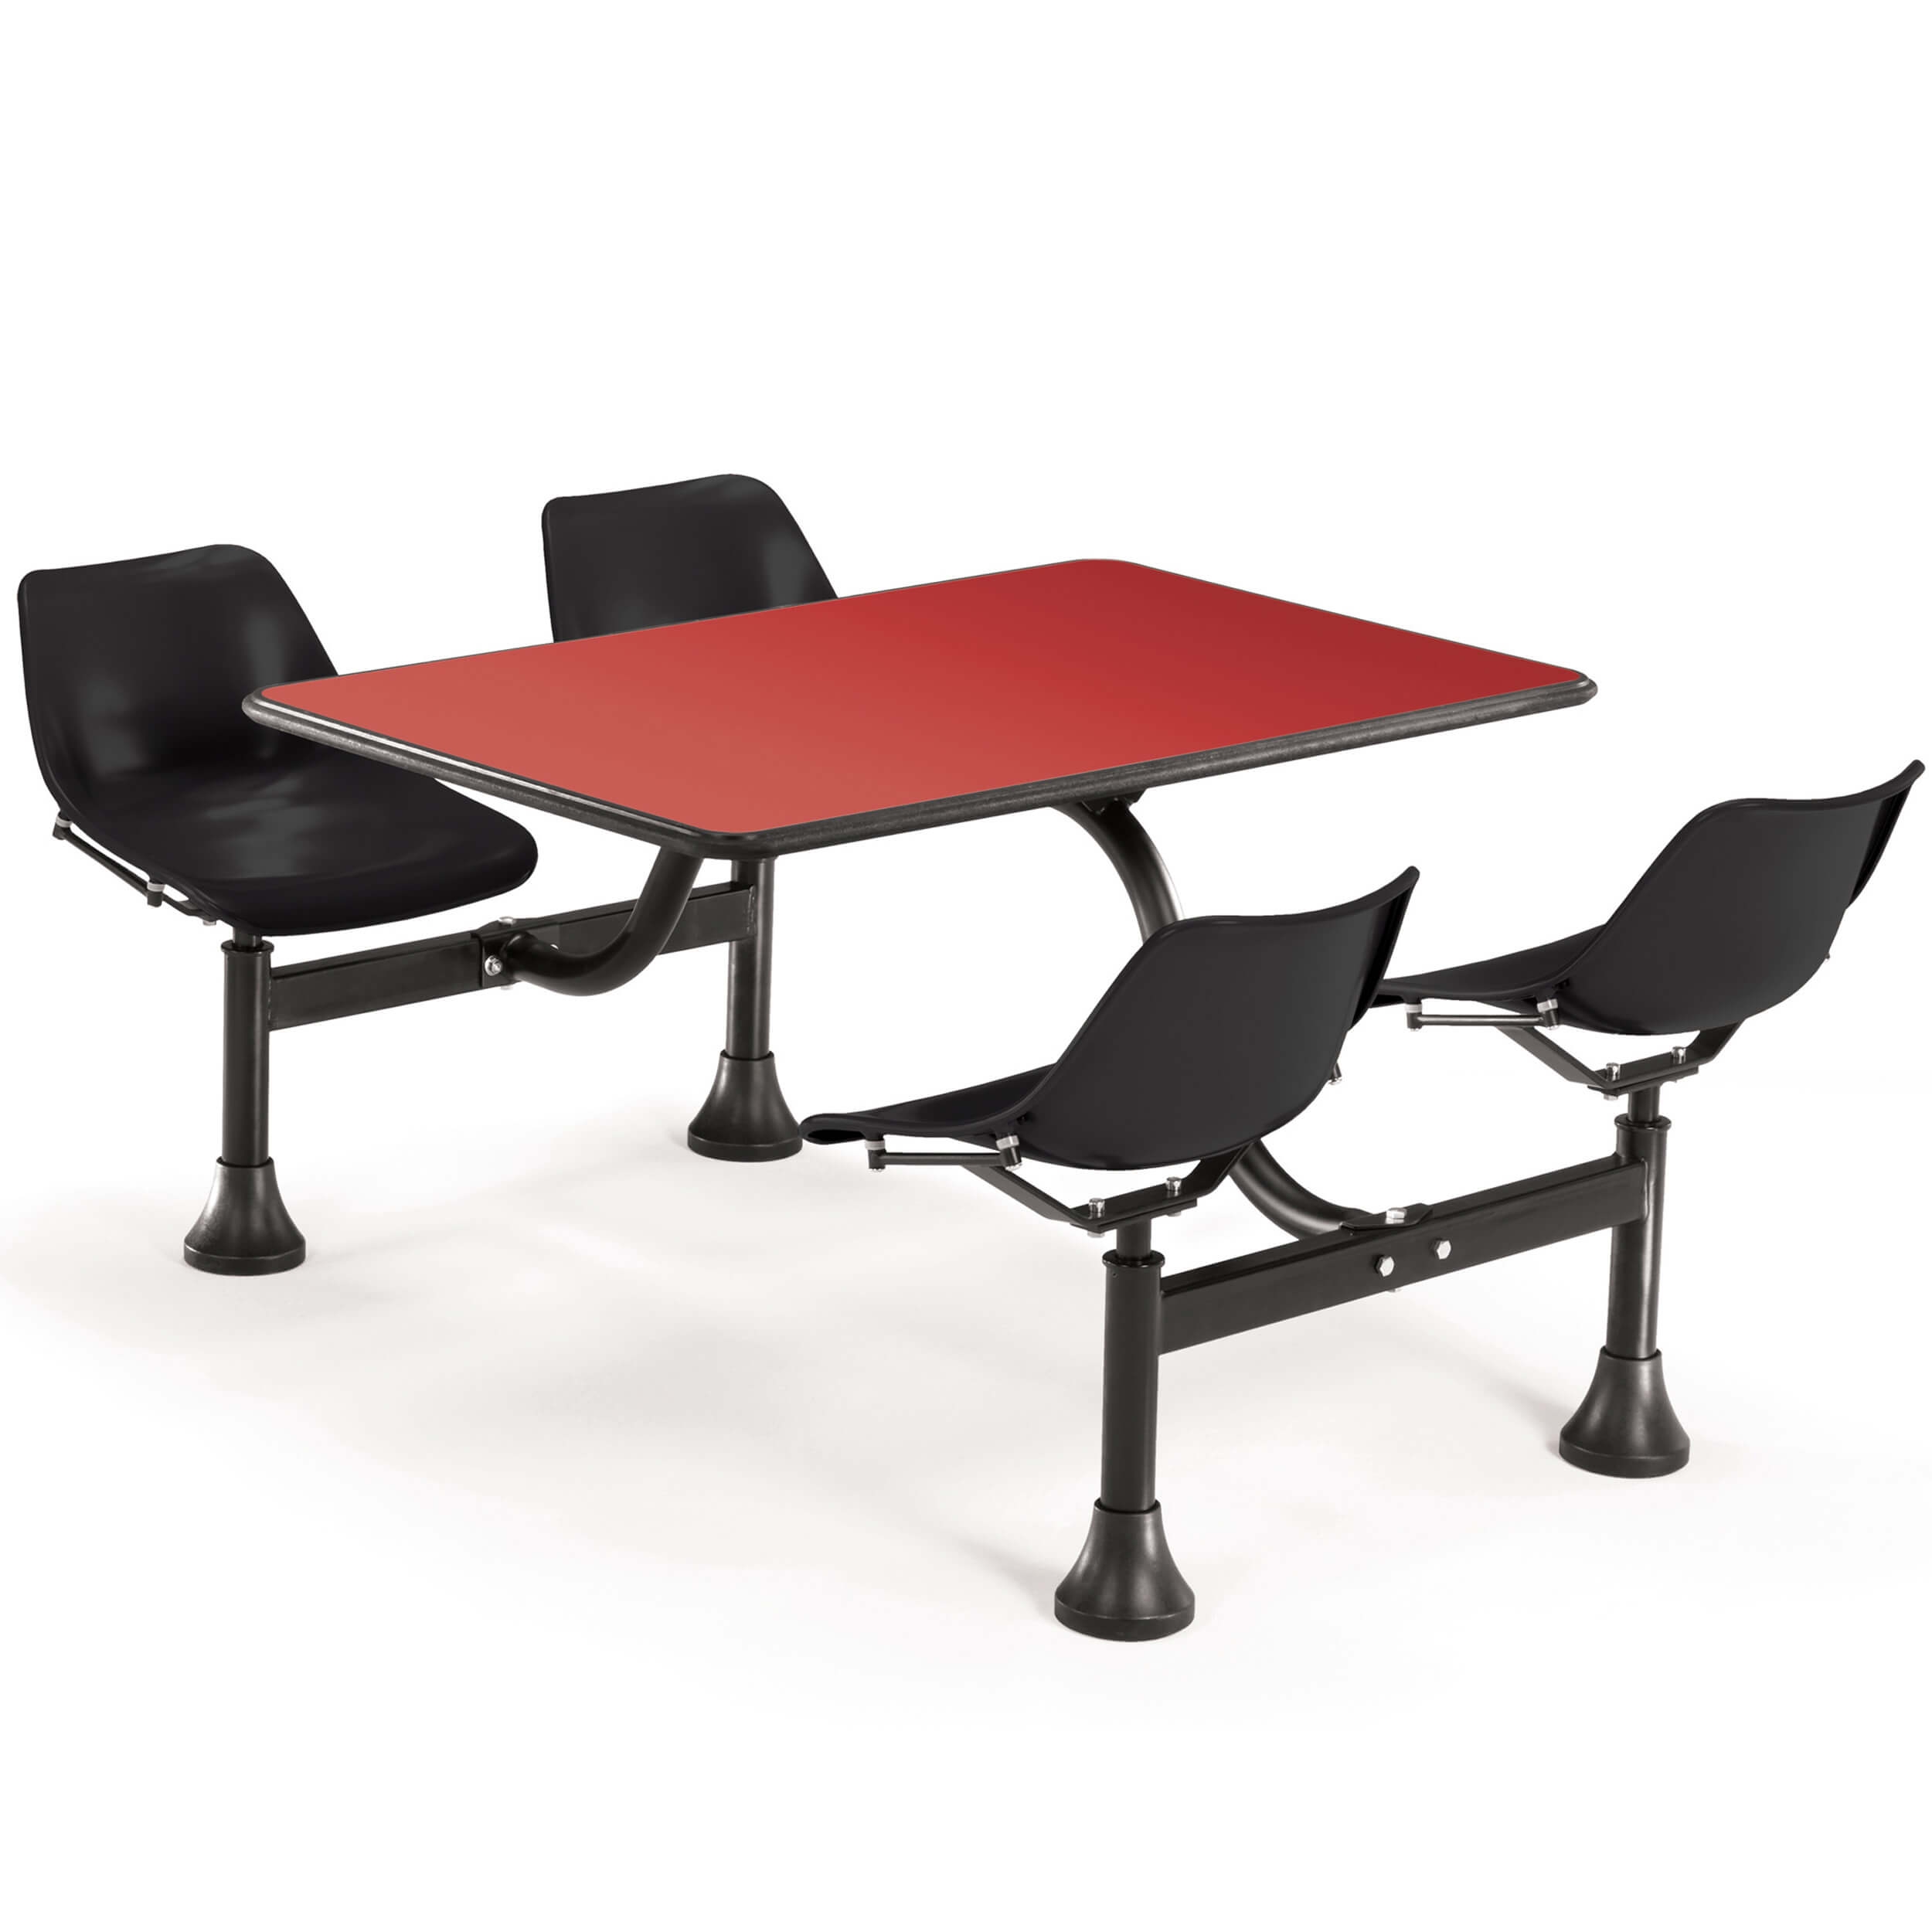 Dining booth CUB 1002 BLK RED OFM